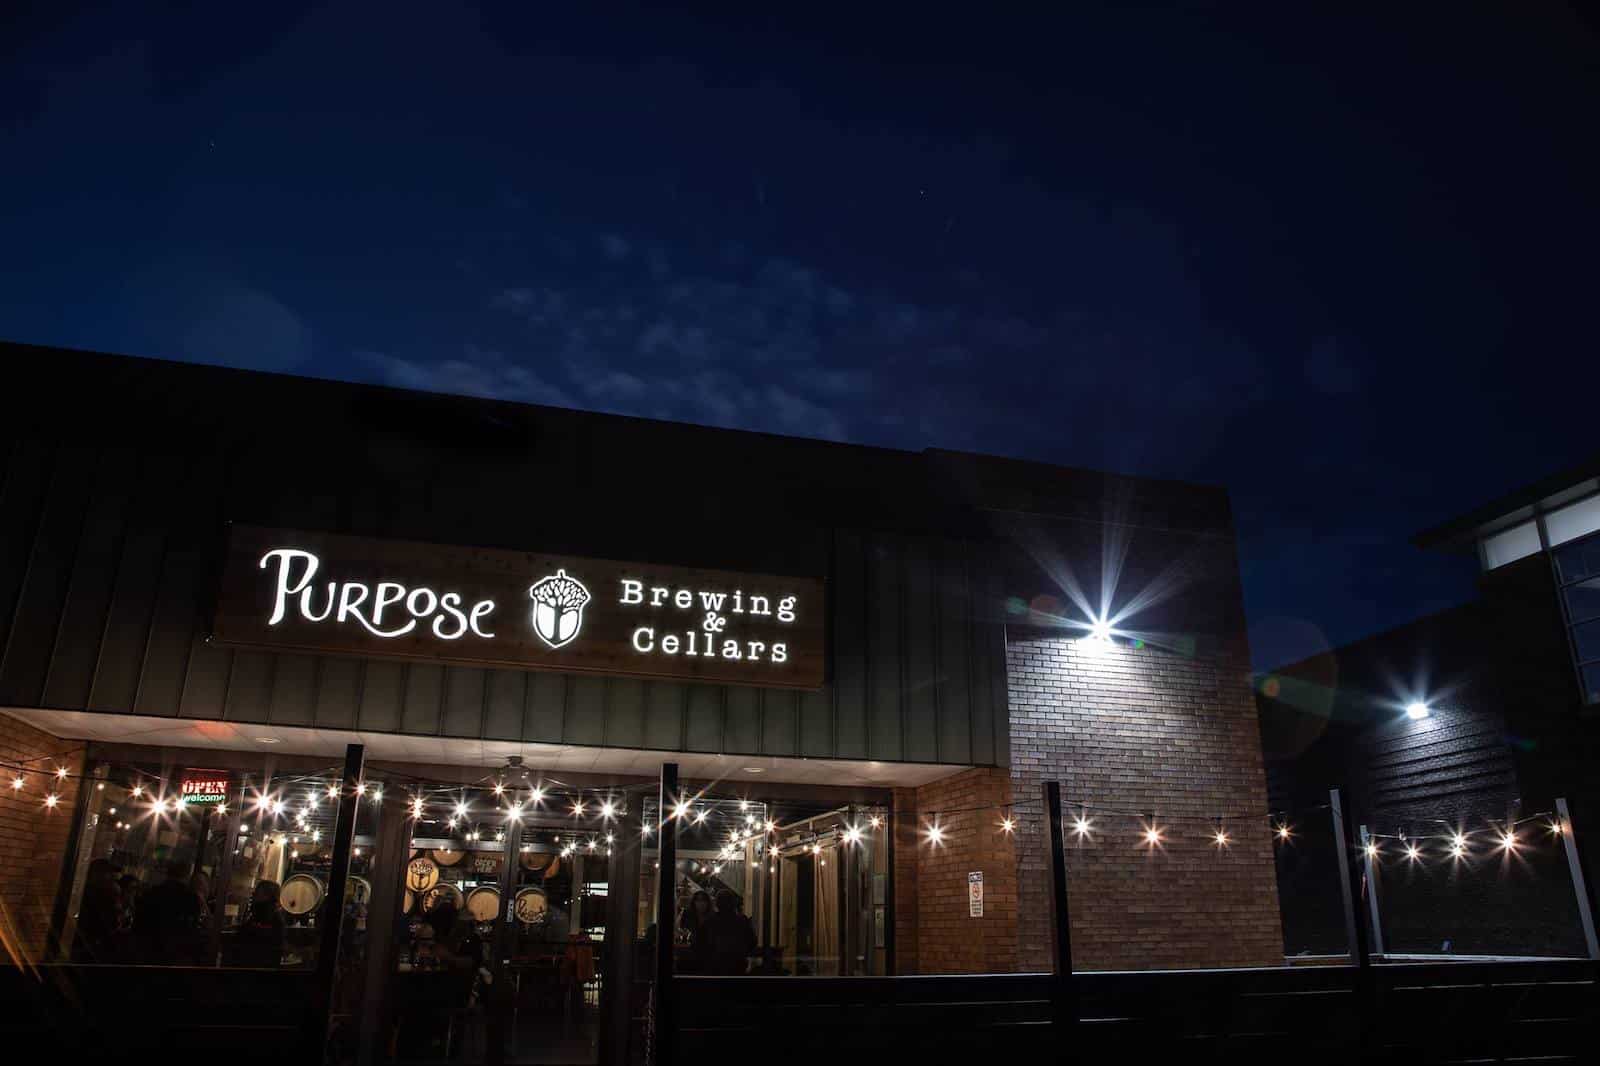 Image of Purpose Brewing and Cellars in Fort Collins, Colorado